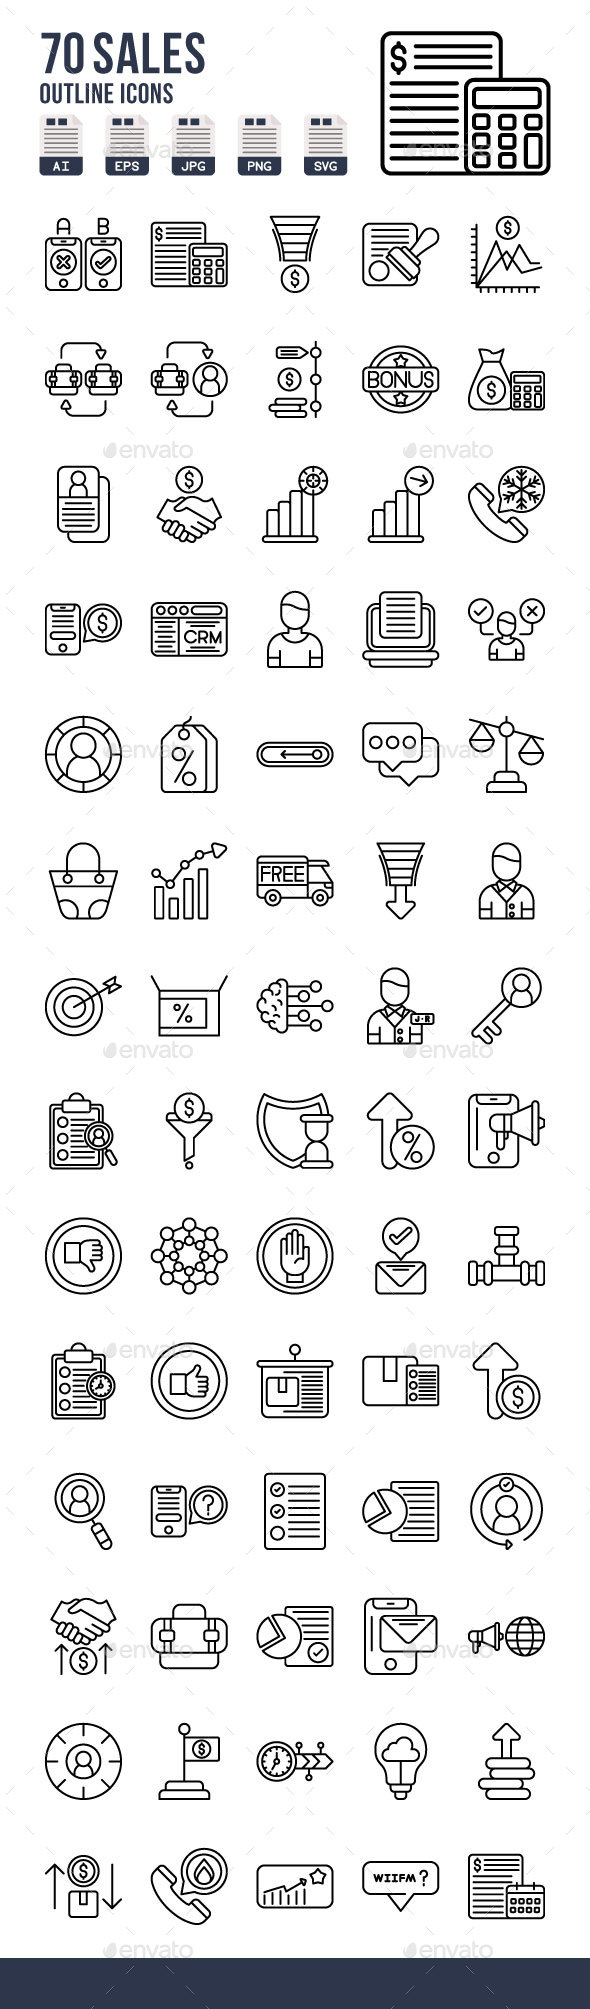 Sales Outline Icons